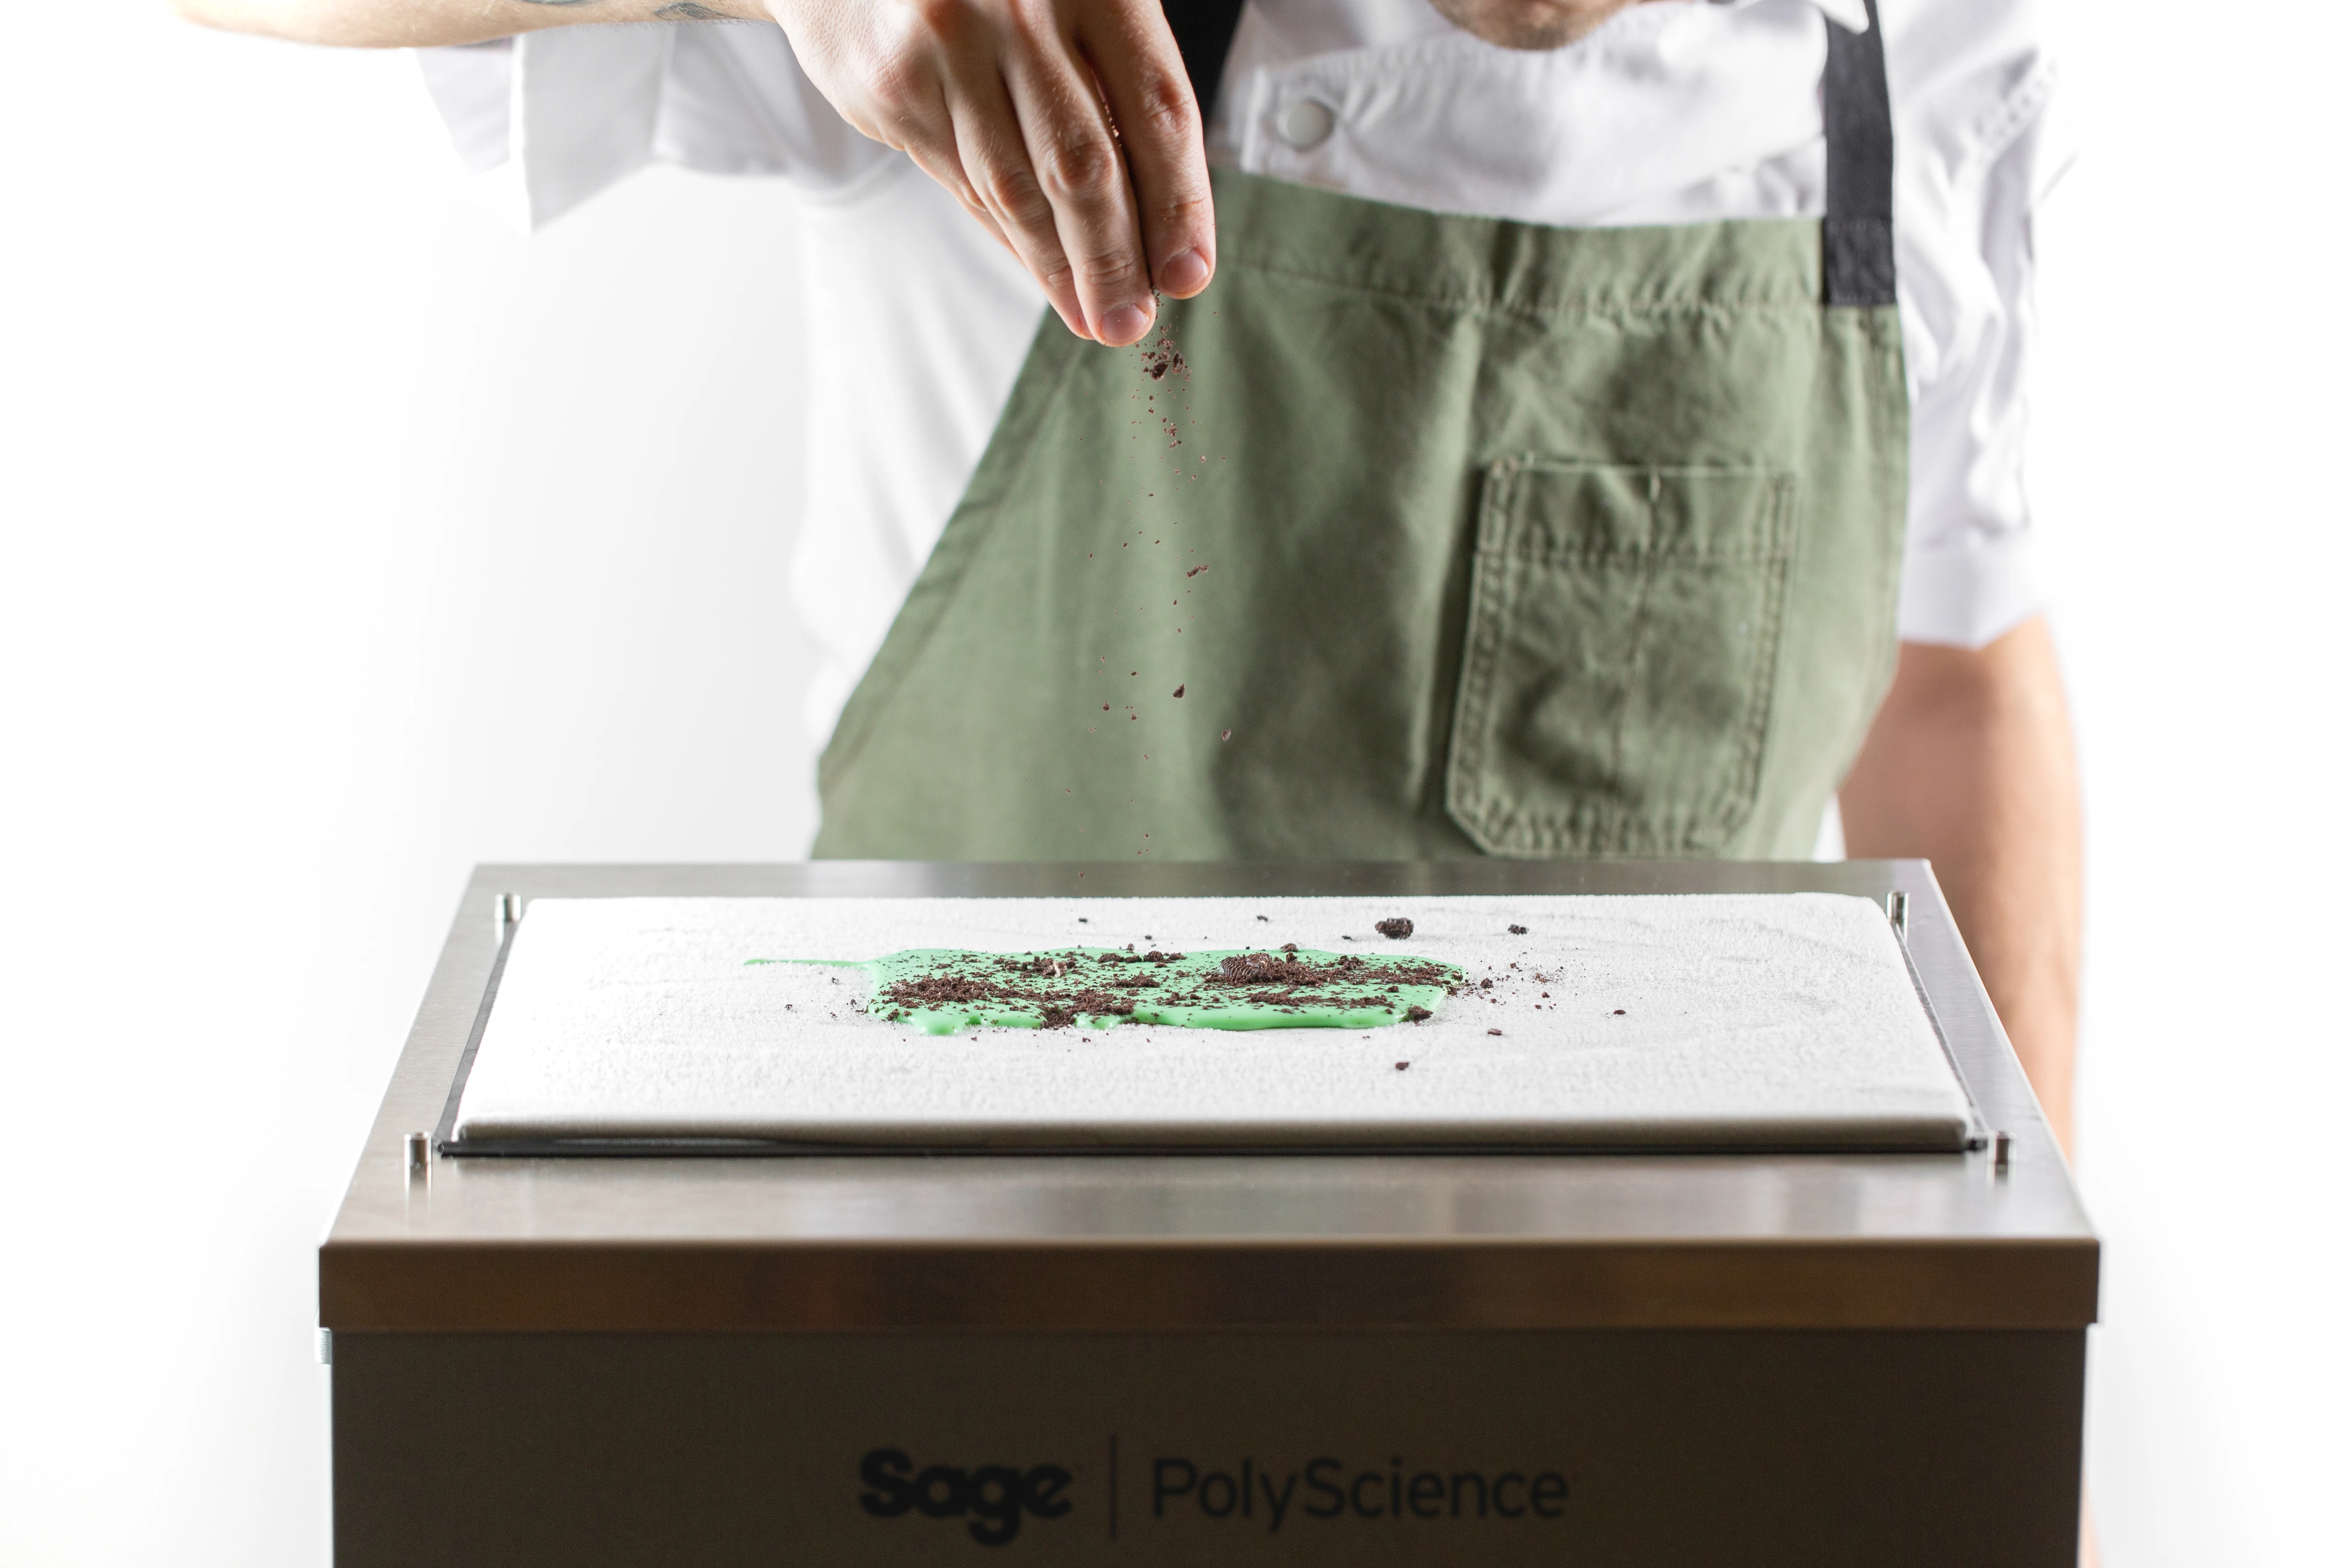 Polyscience Anti-Griddle